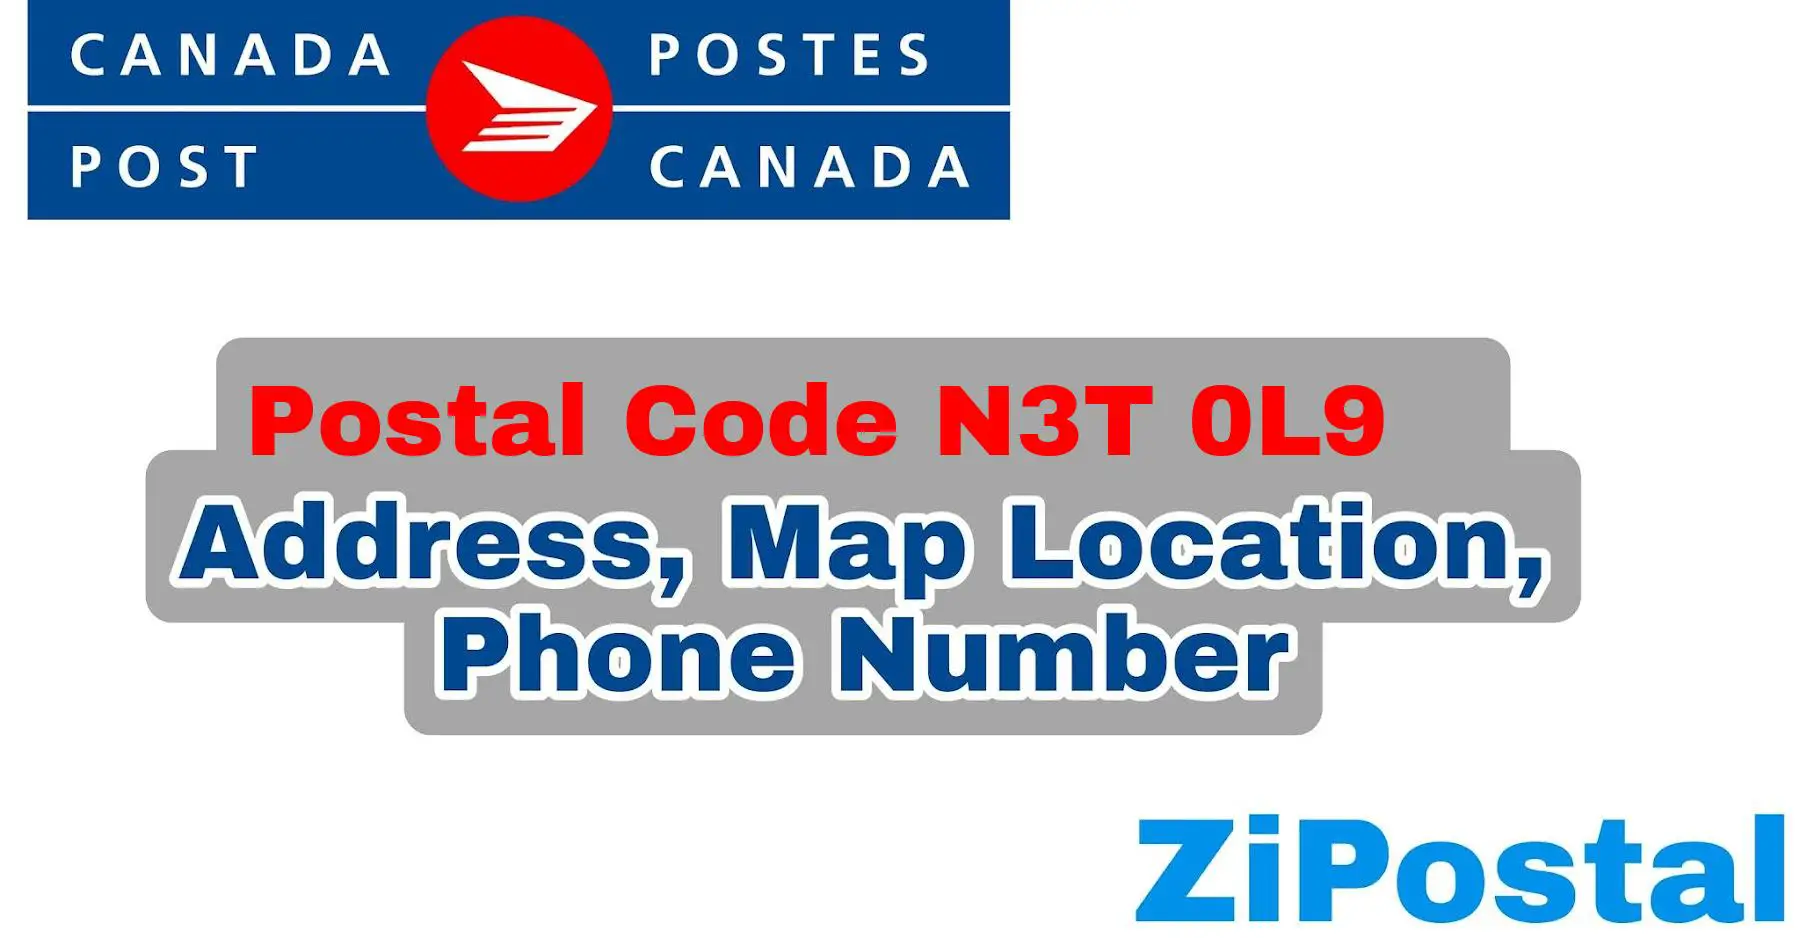 Postal Code N3T 0L9 Address Map Location and Phone Number